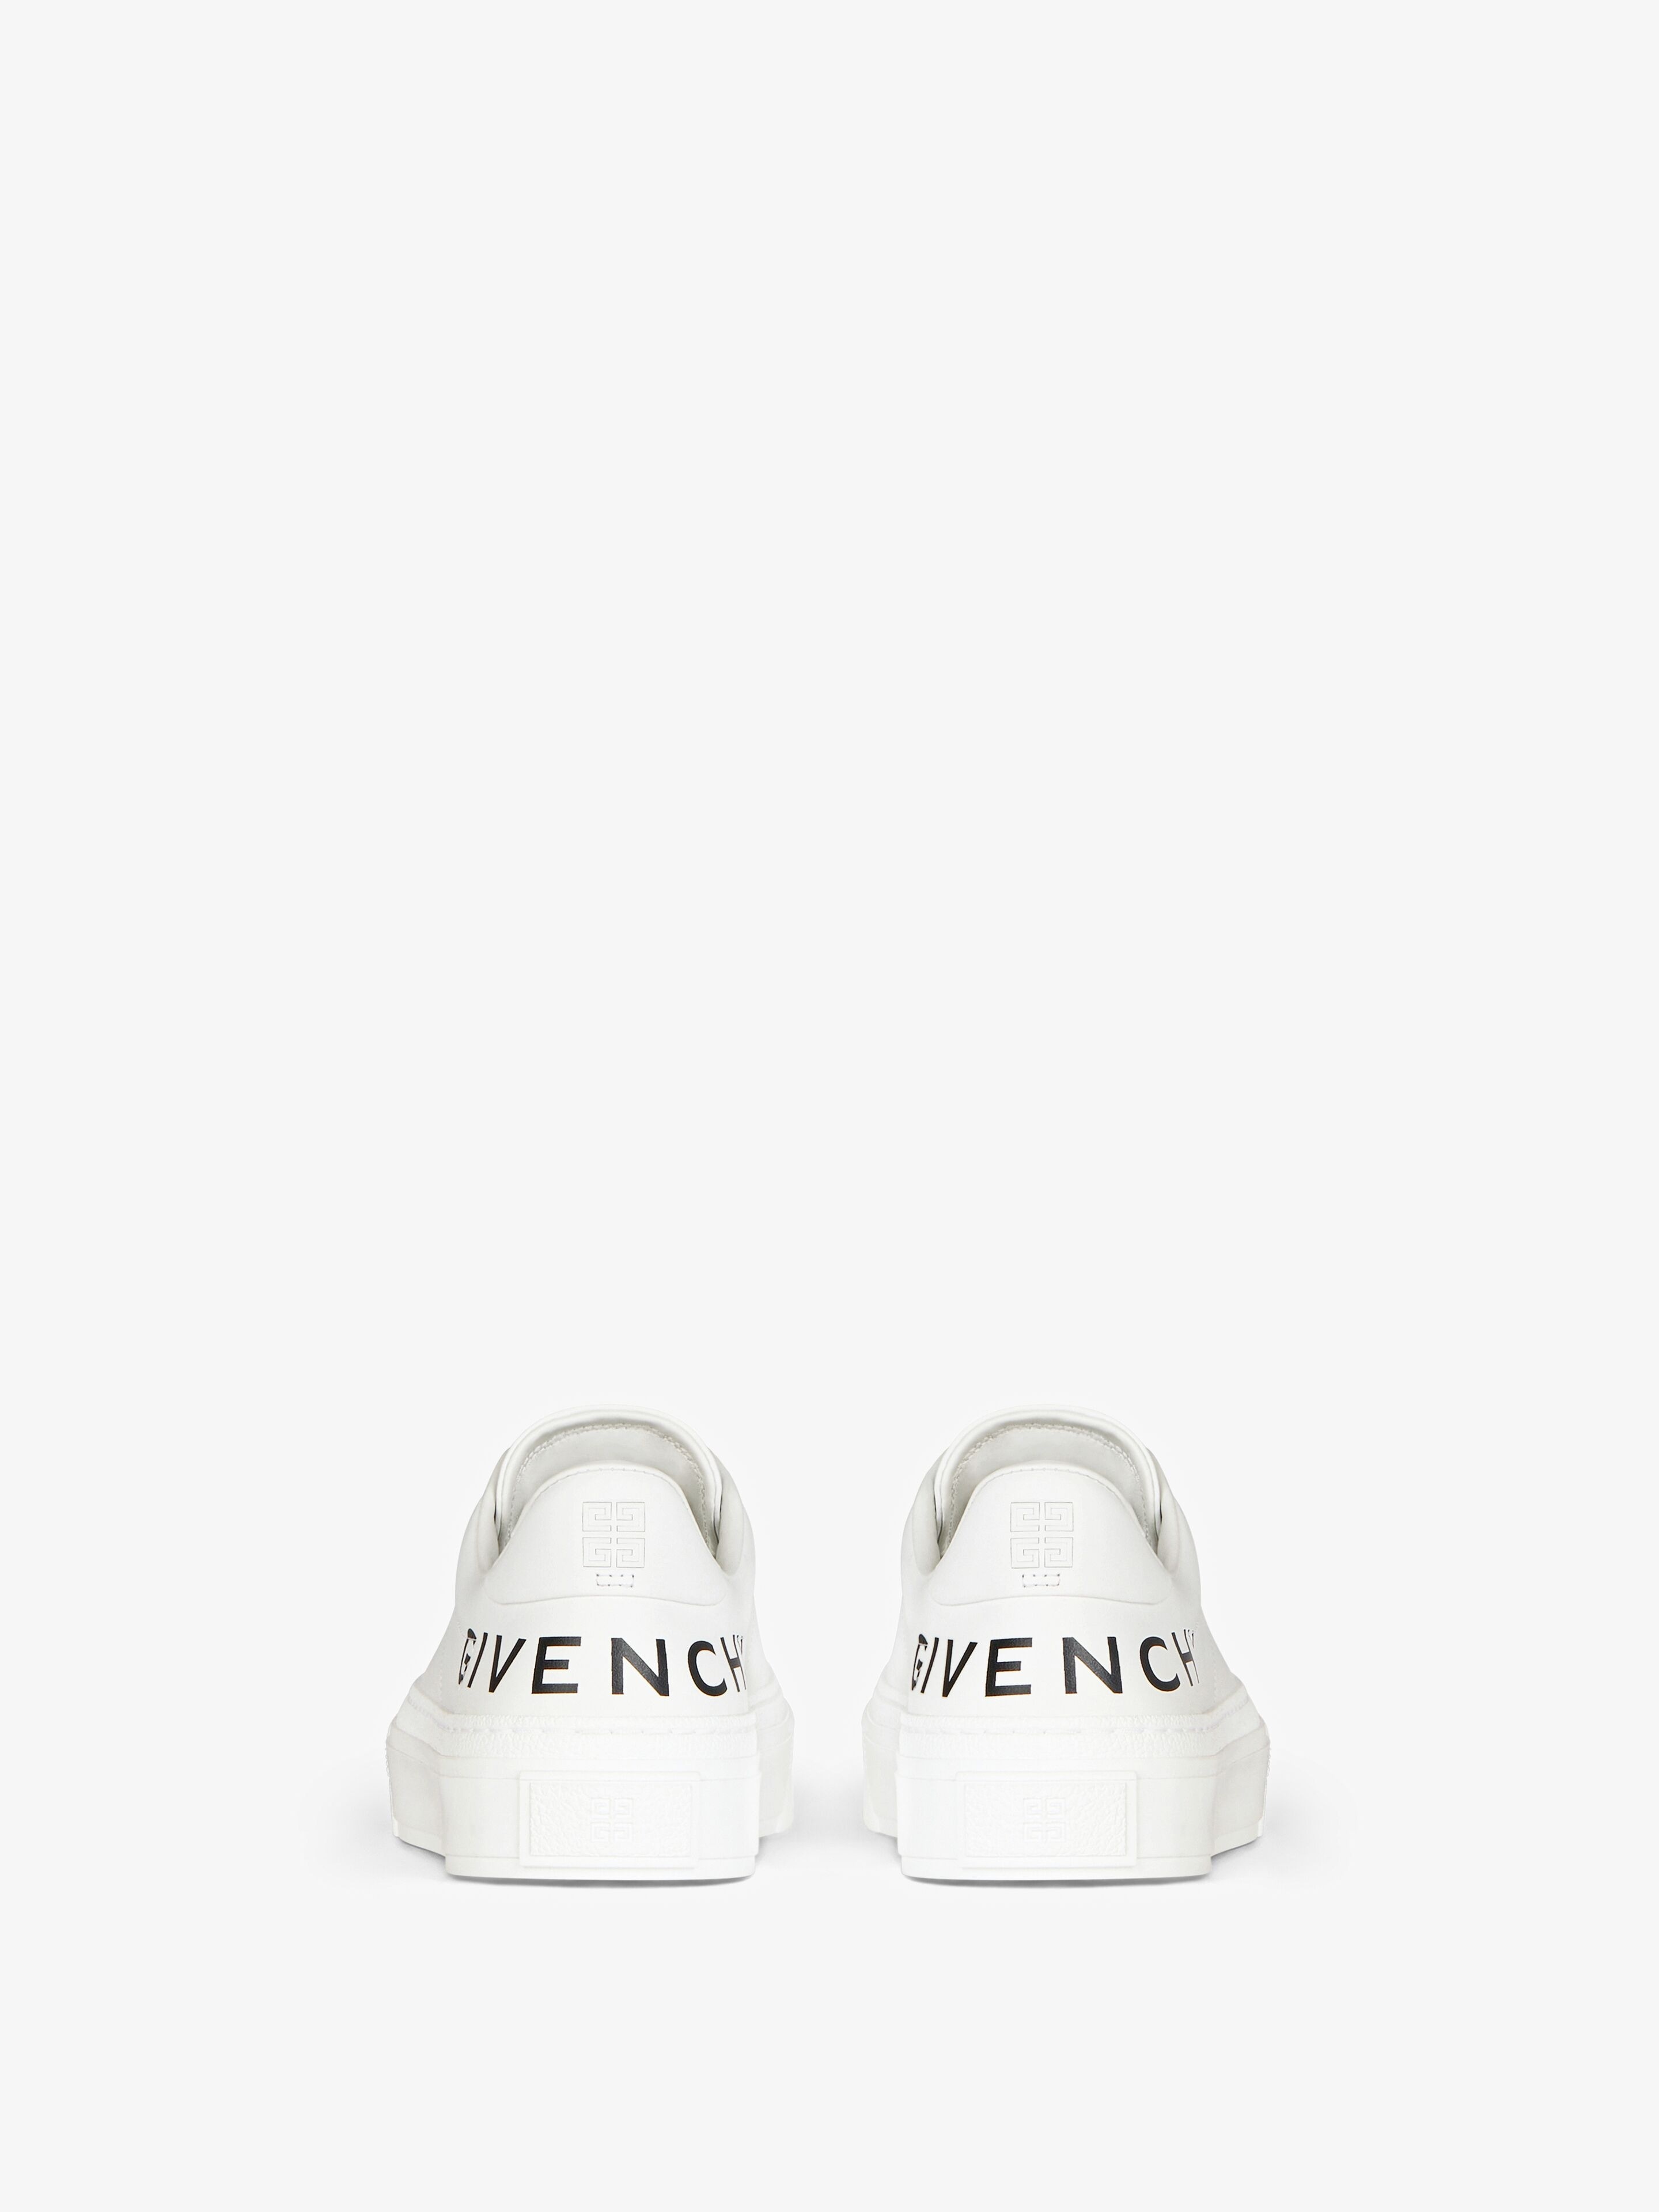 GIVENCHY CITY SPORT SNEAKERS IN LEATHER - 7